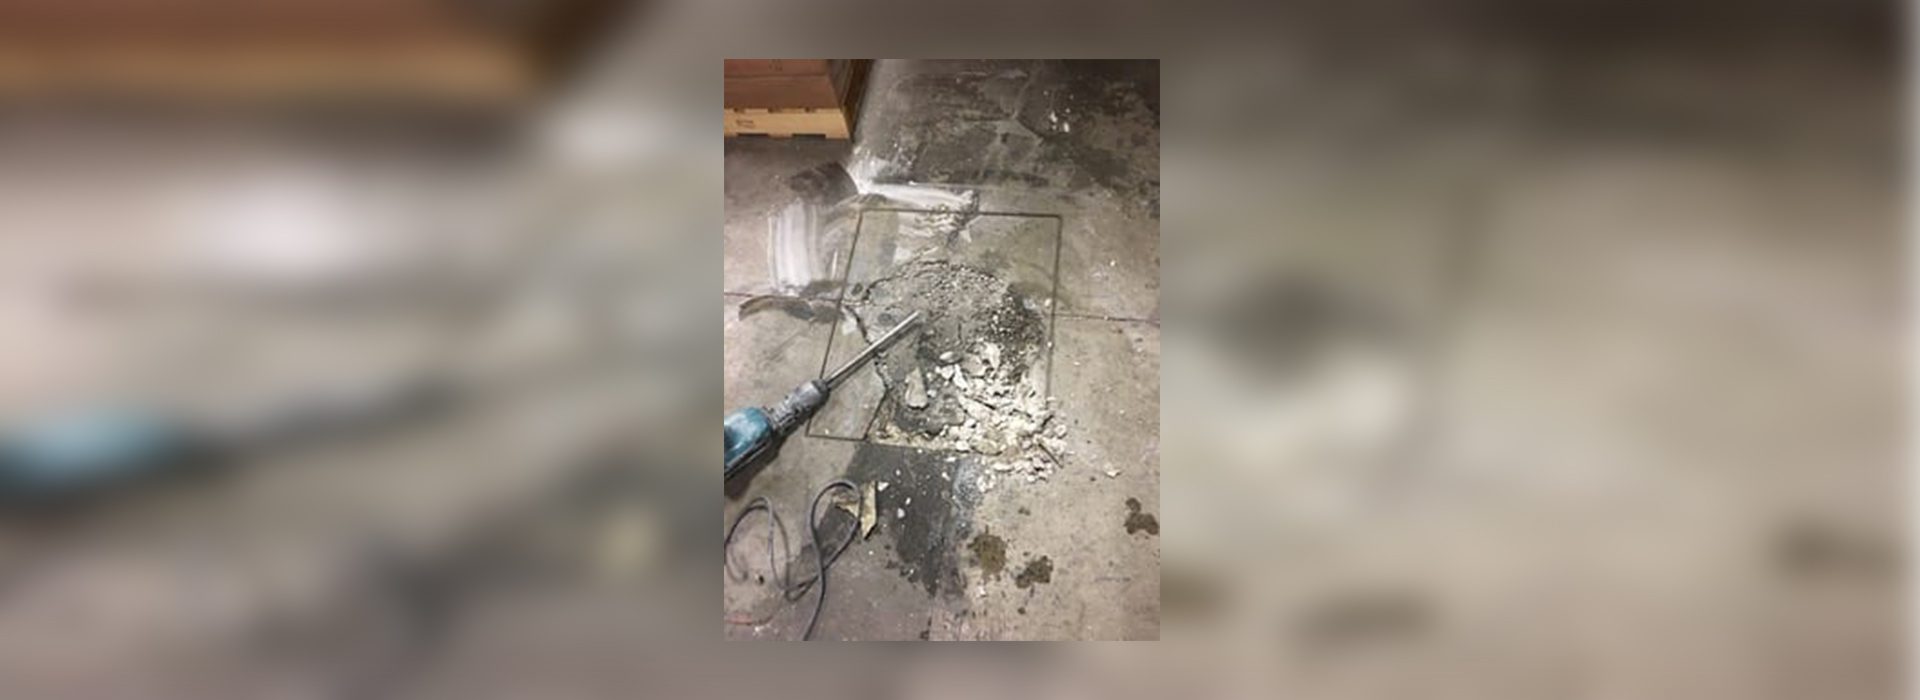 A broken floor with a power drill and some wires